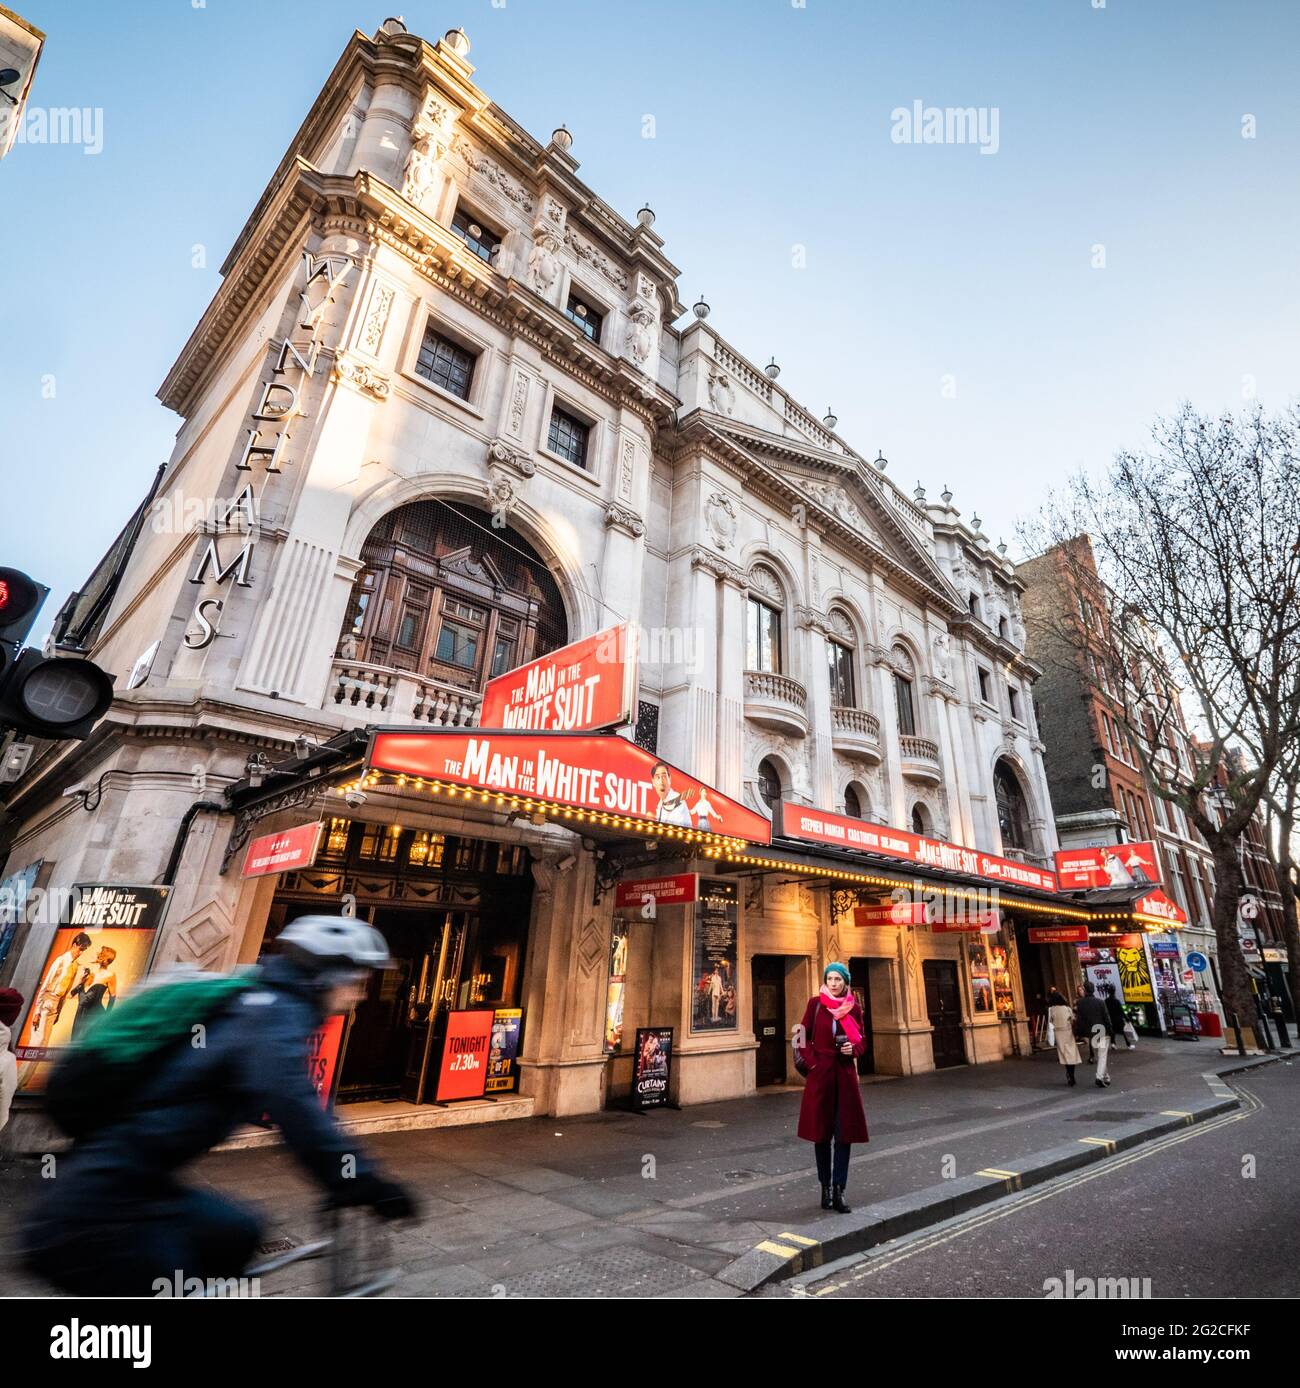 Wyndhams Theatre, London. Low, wide angle view of the façade to a theatre in London's West End with The Man in the White Suit in production. Stock Photo